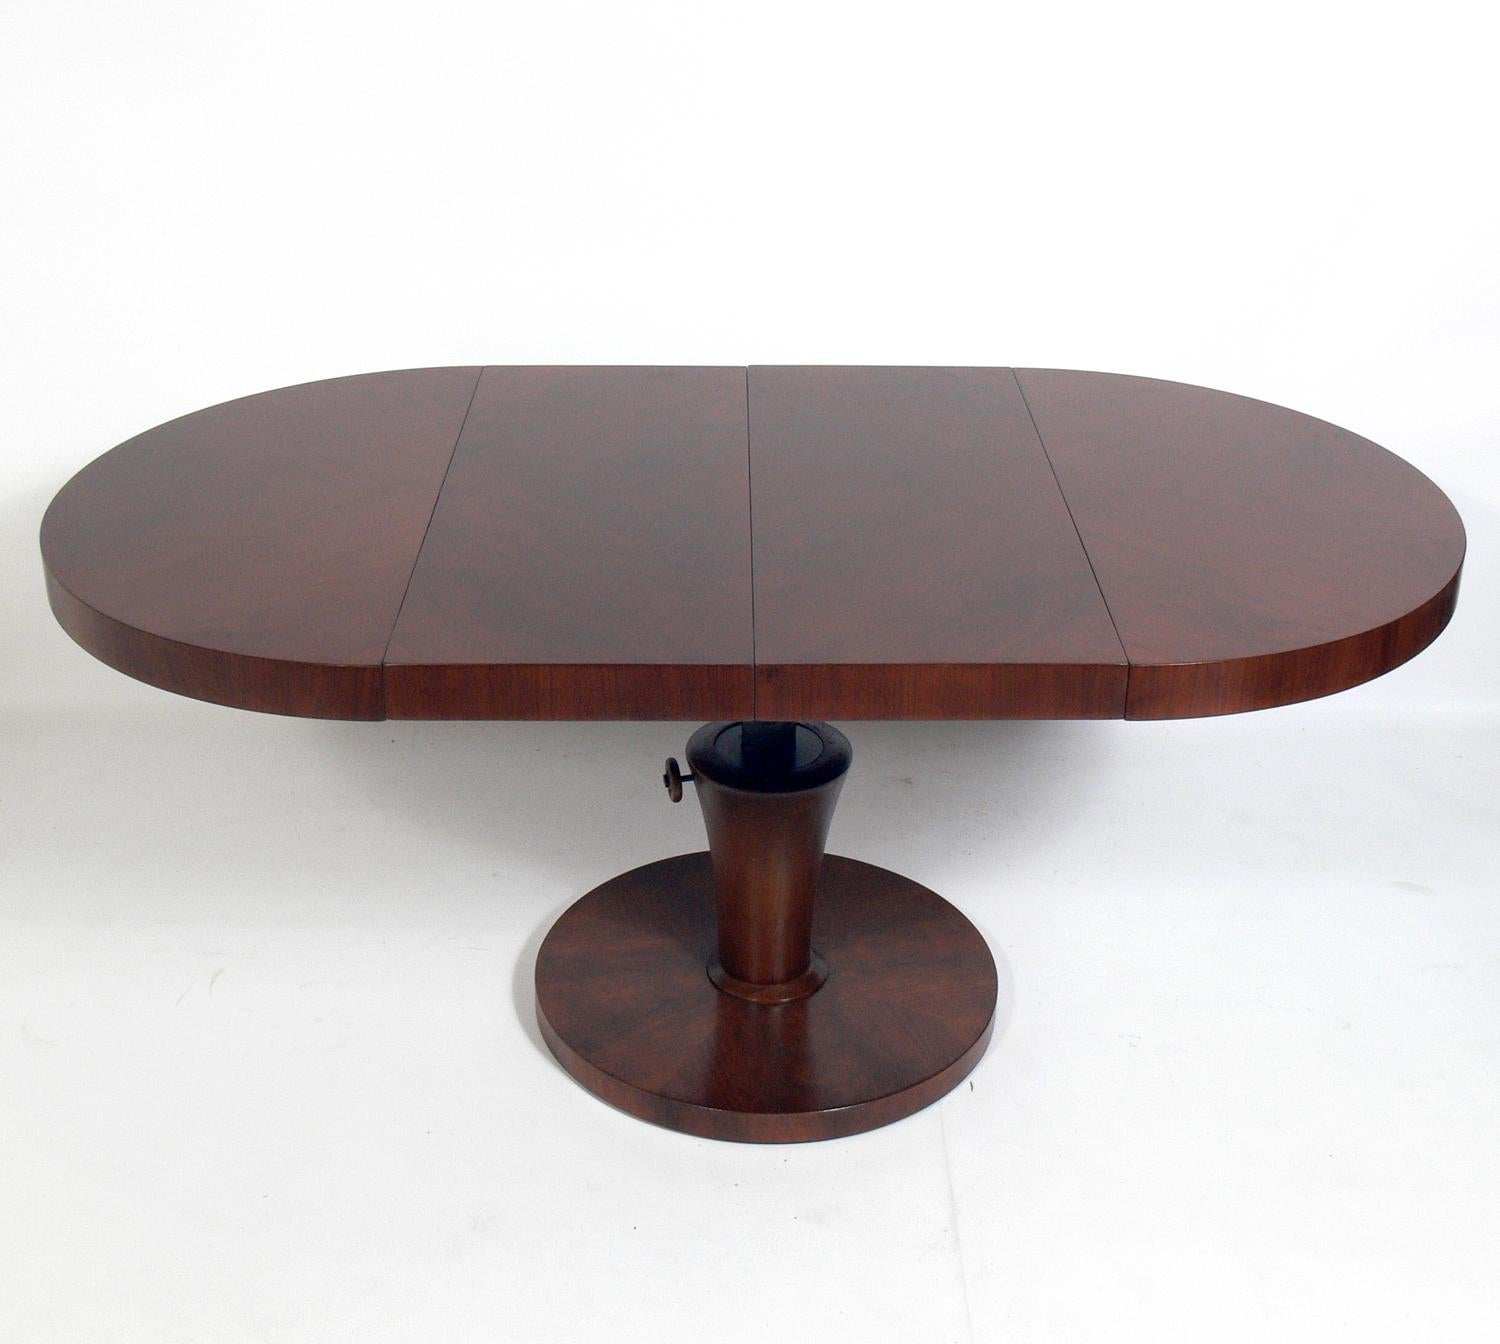 Danish modern style convertible coffee or dining table, Sweden, circa 1950s. It is a versatile size and can go from coffee table height to dining table height with just a few turns. It also comes with two leaves to seat up to six. Great table for an